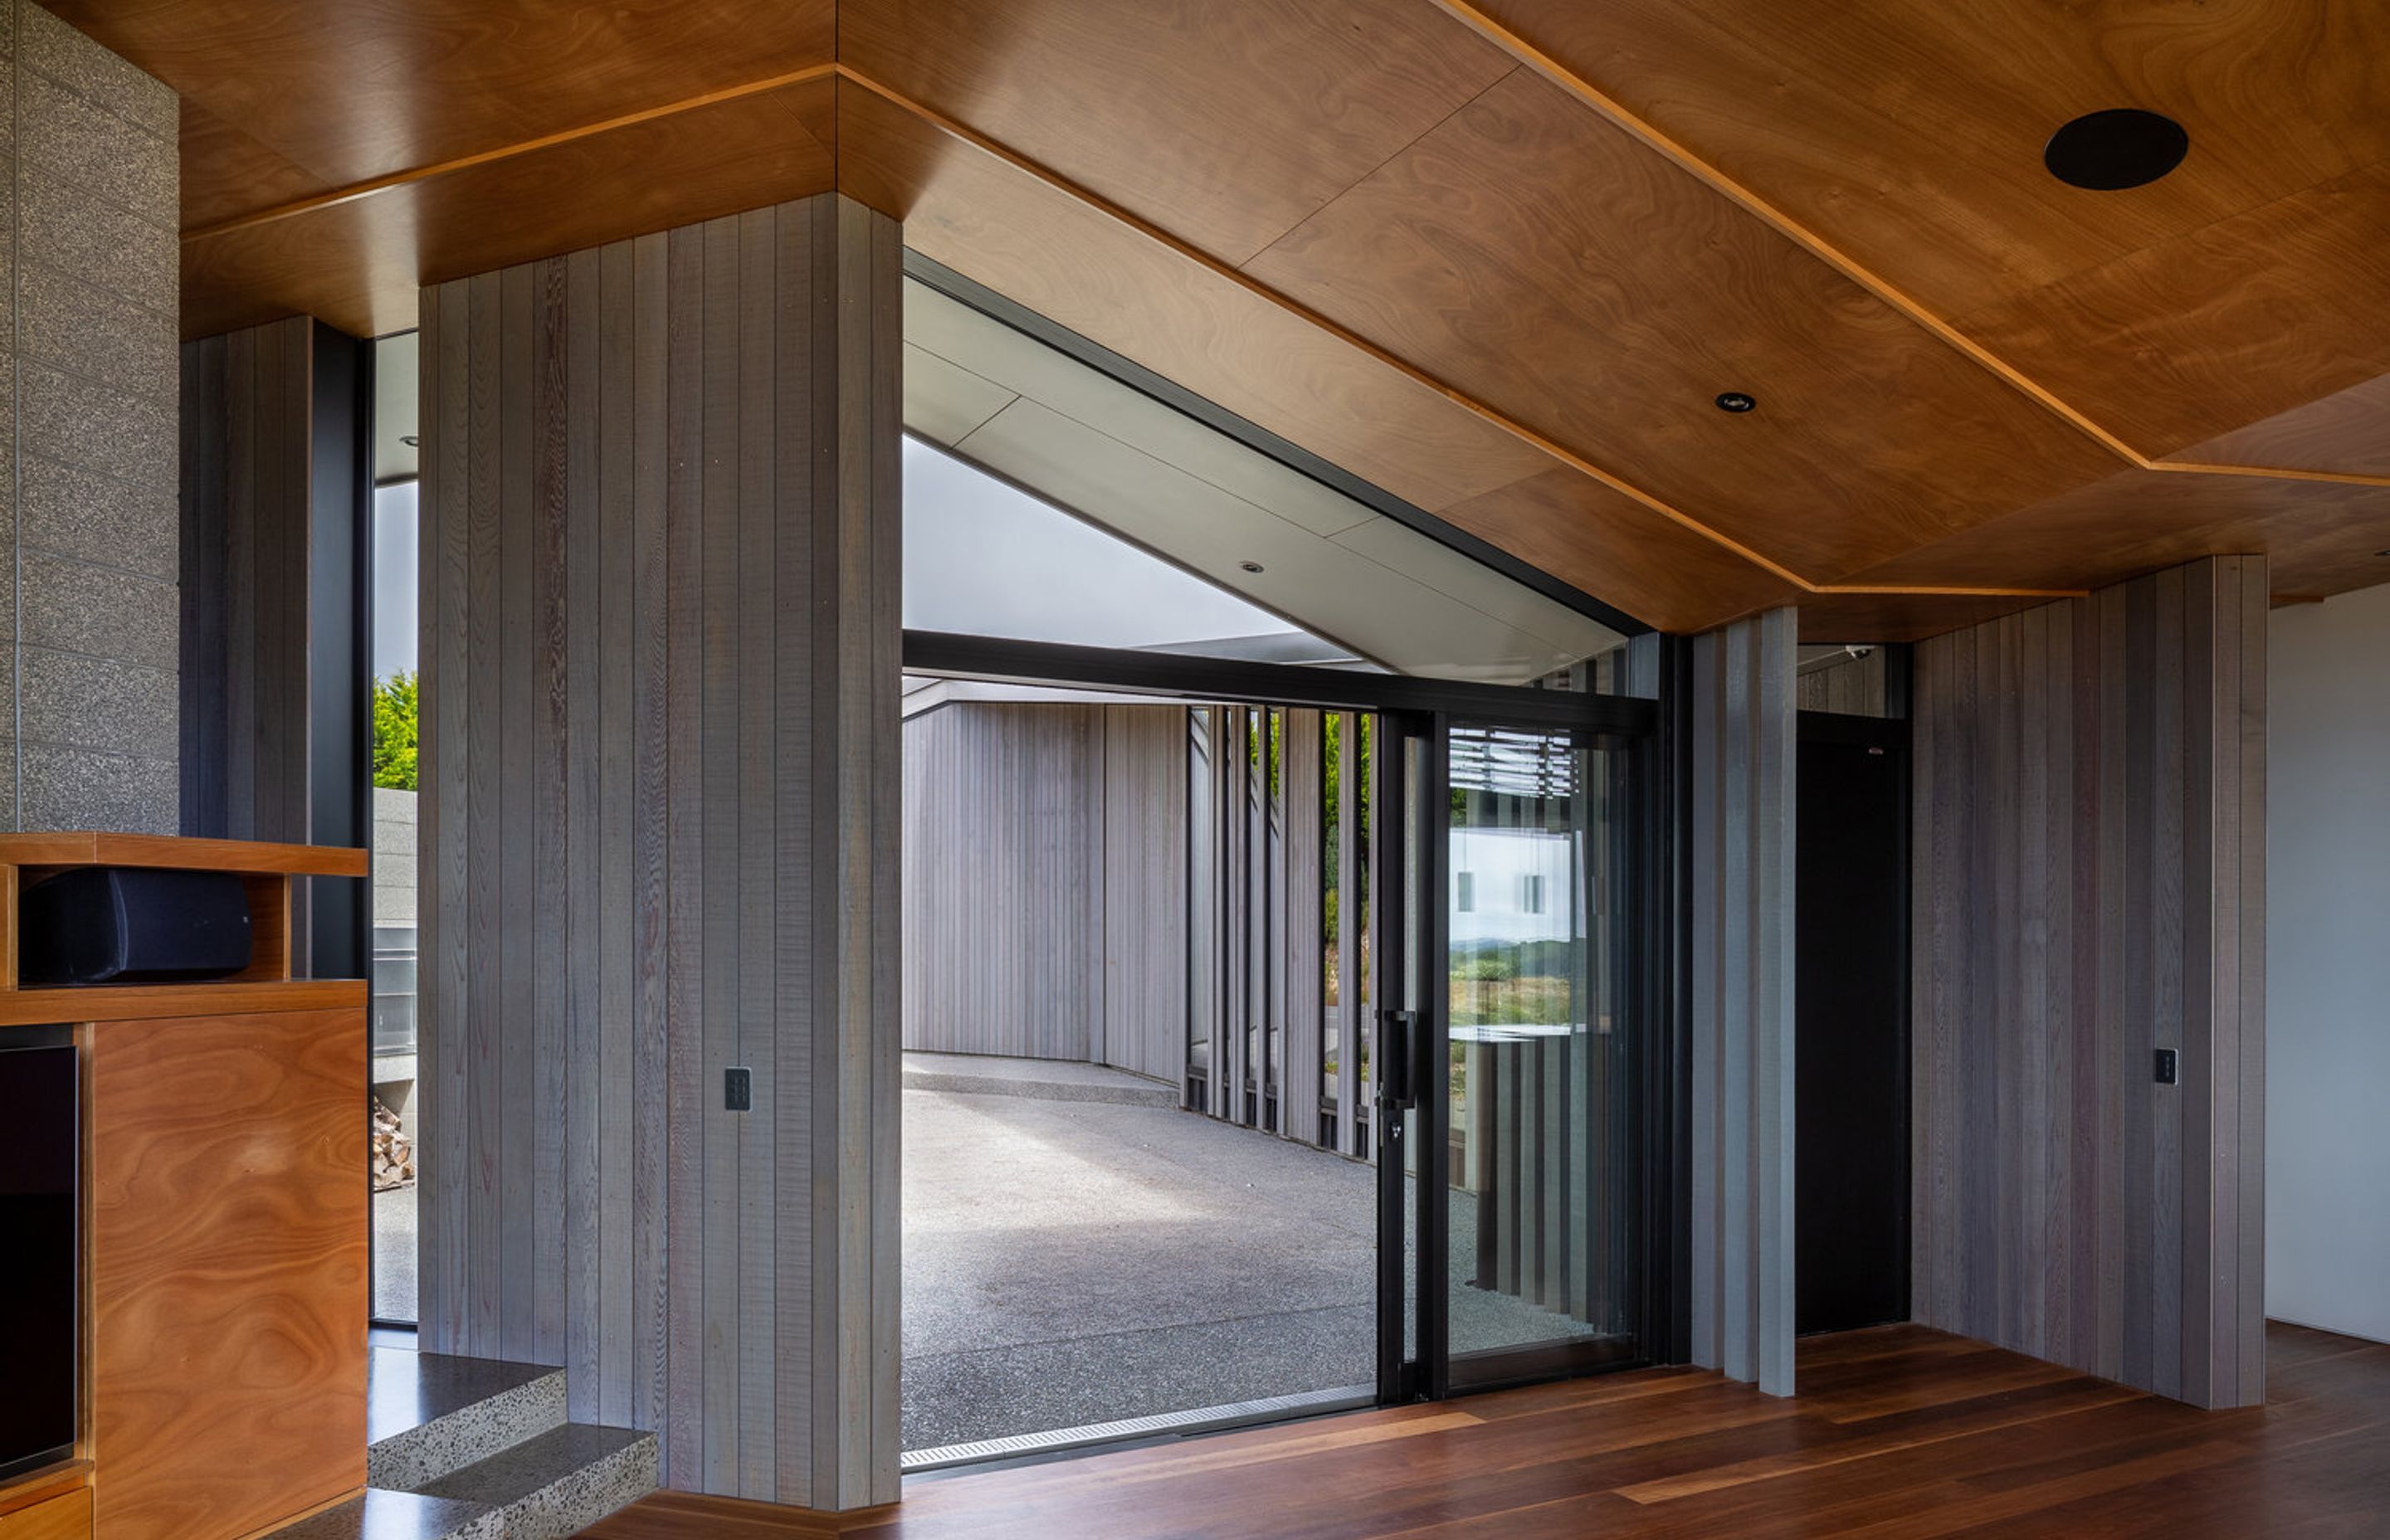 Oiled cedar cladding and concrete continues into the hallway, merging inside and outside.